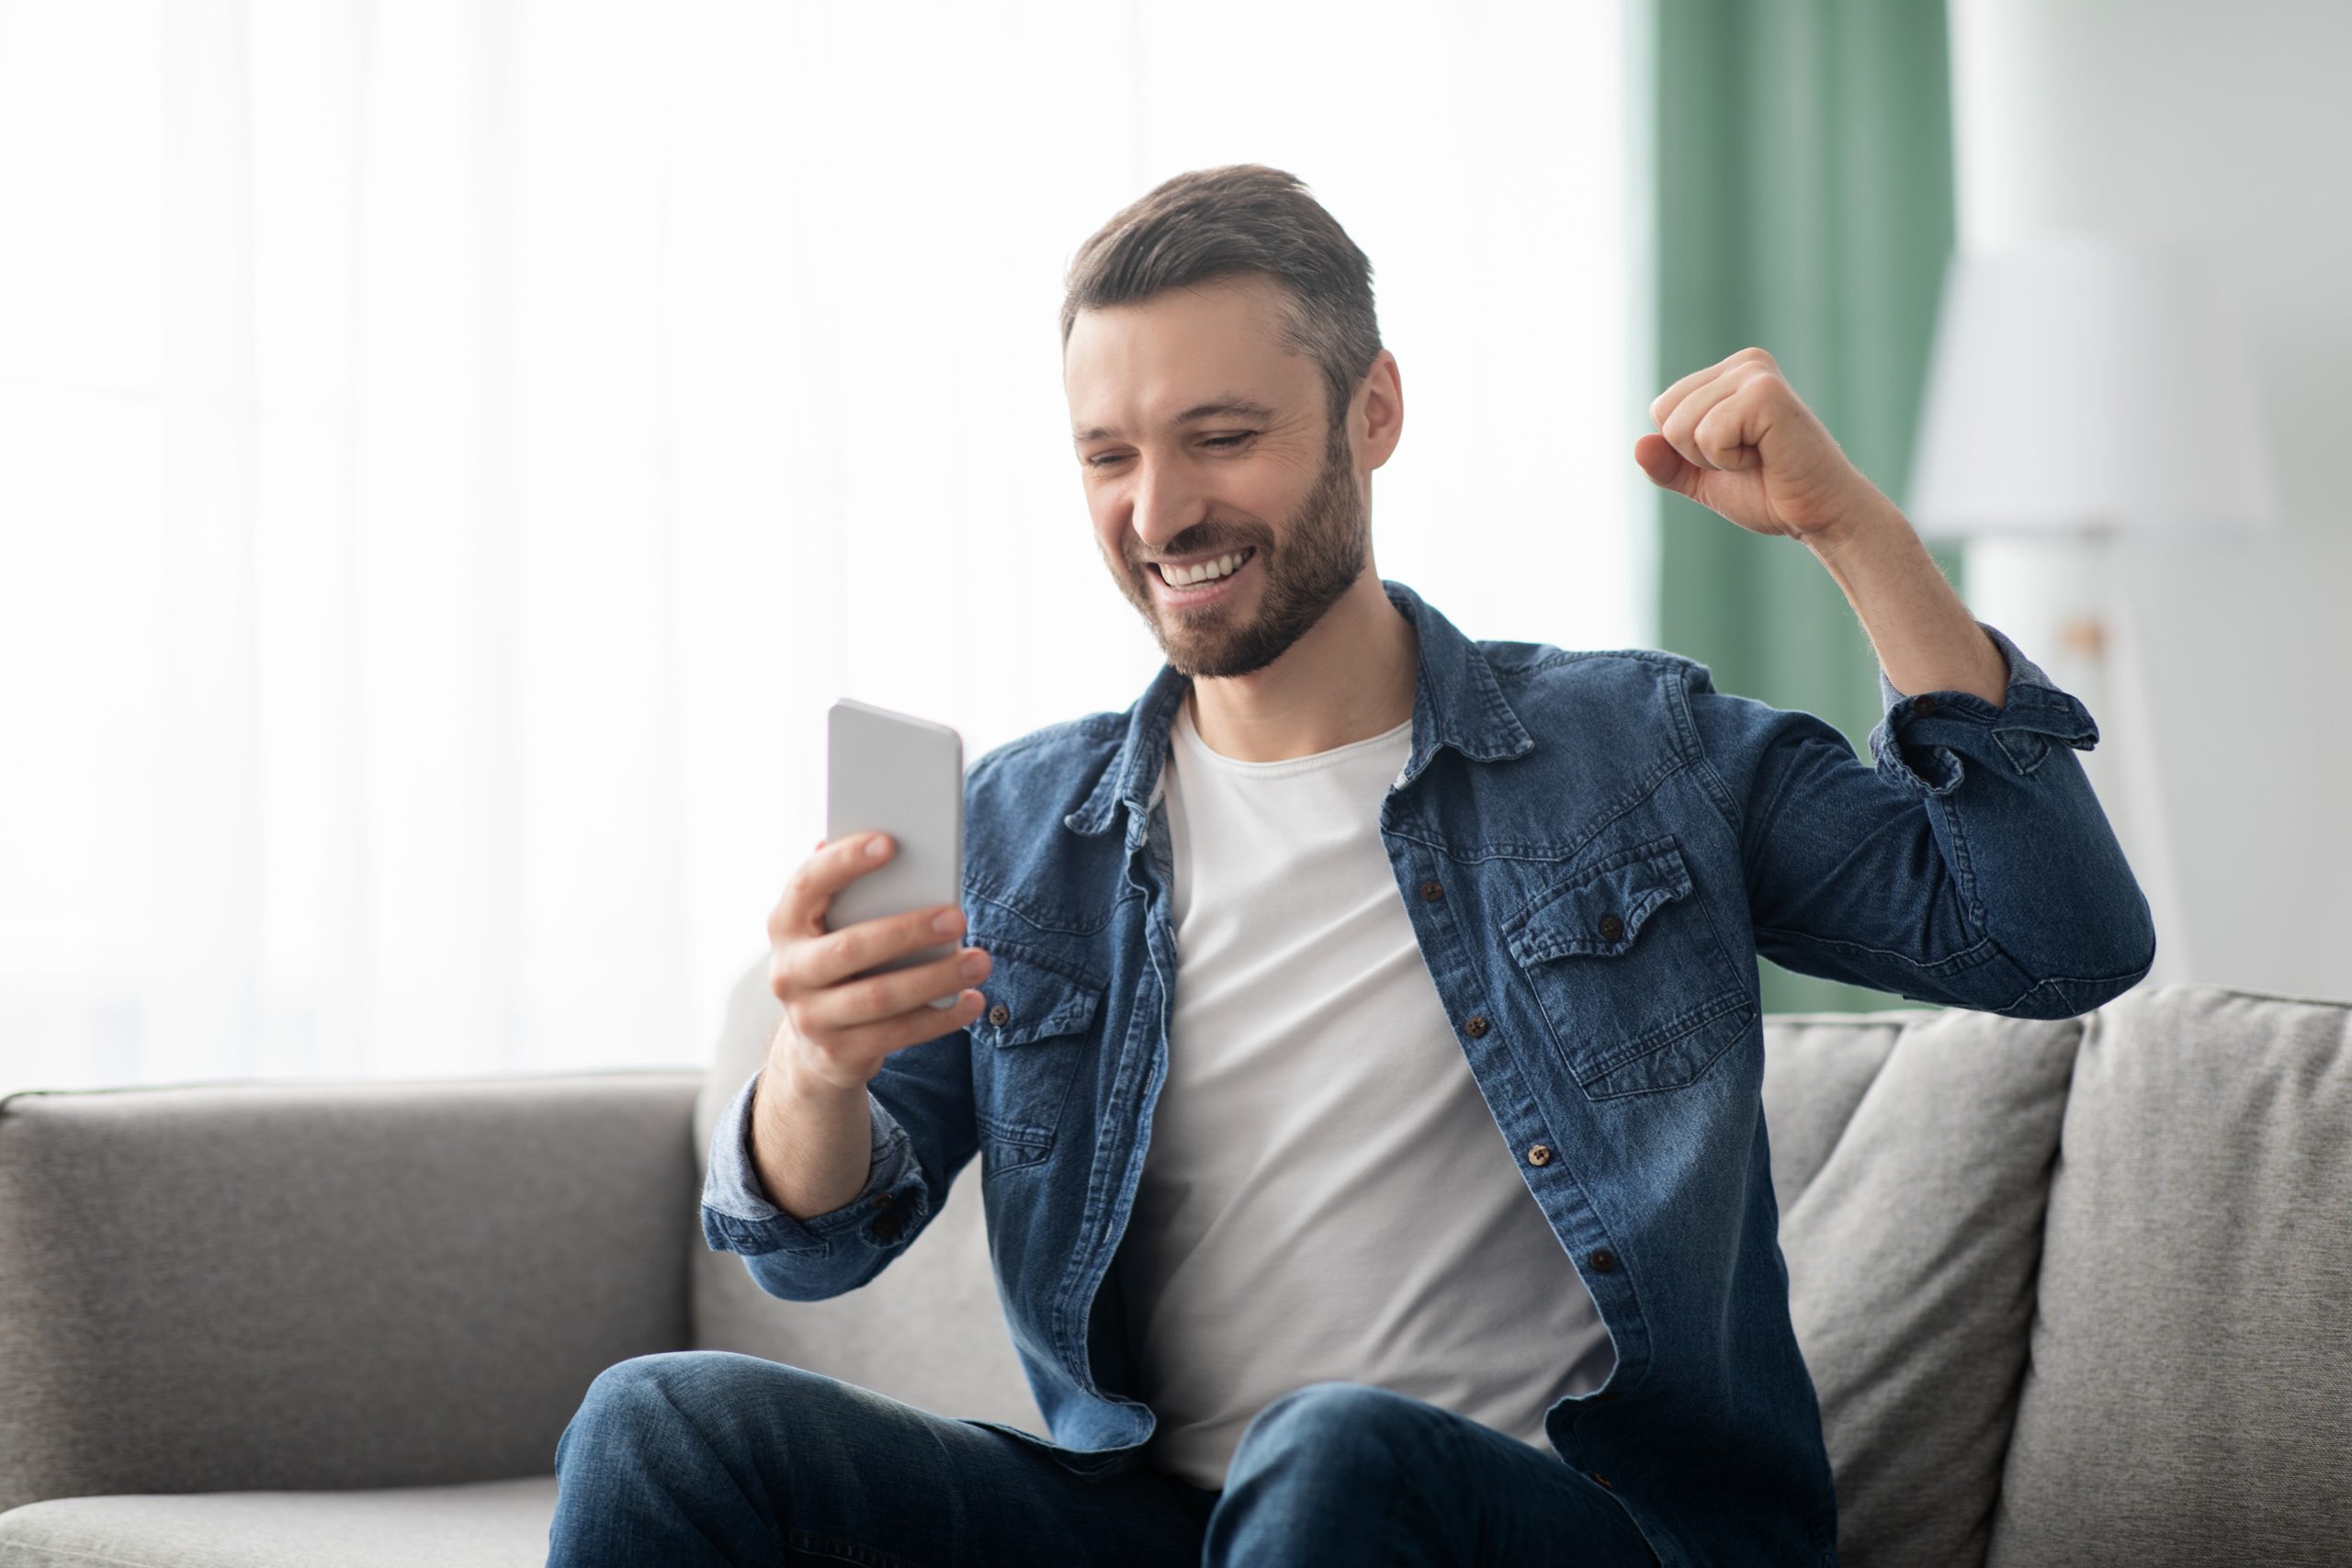 Emotional bearded middle-aged man celebrating success, gambling or trading online, using mobile phone while sitting on couch at home, copy space. Online gaming, financial markets concept